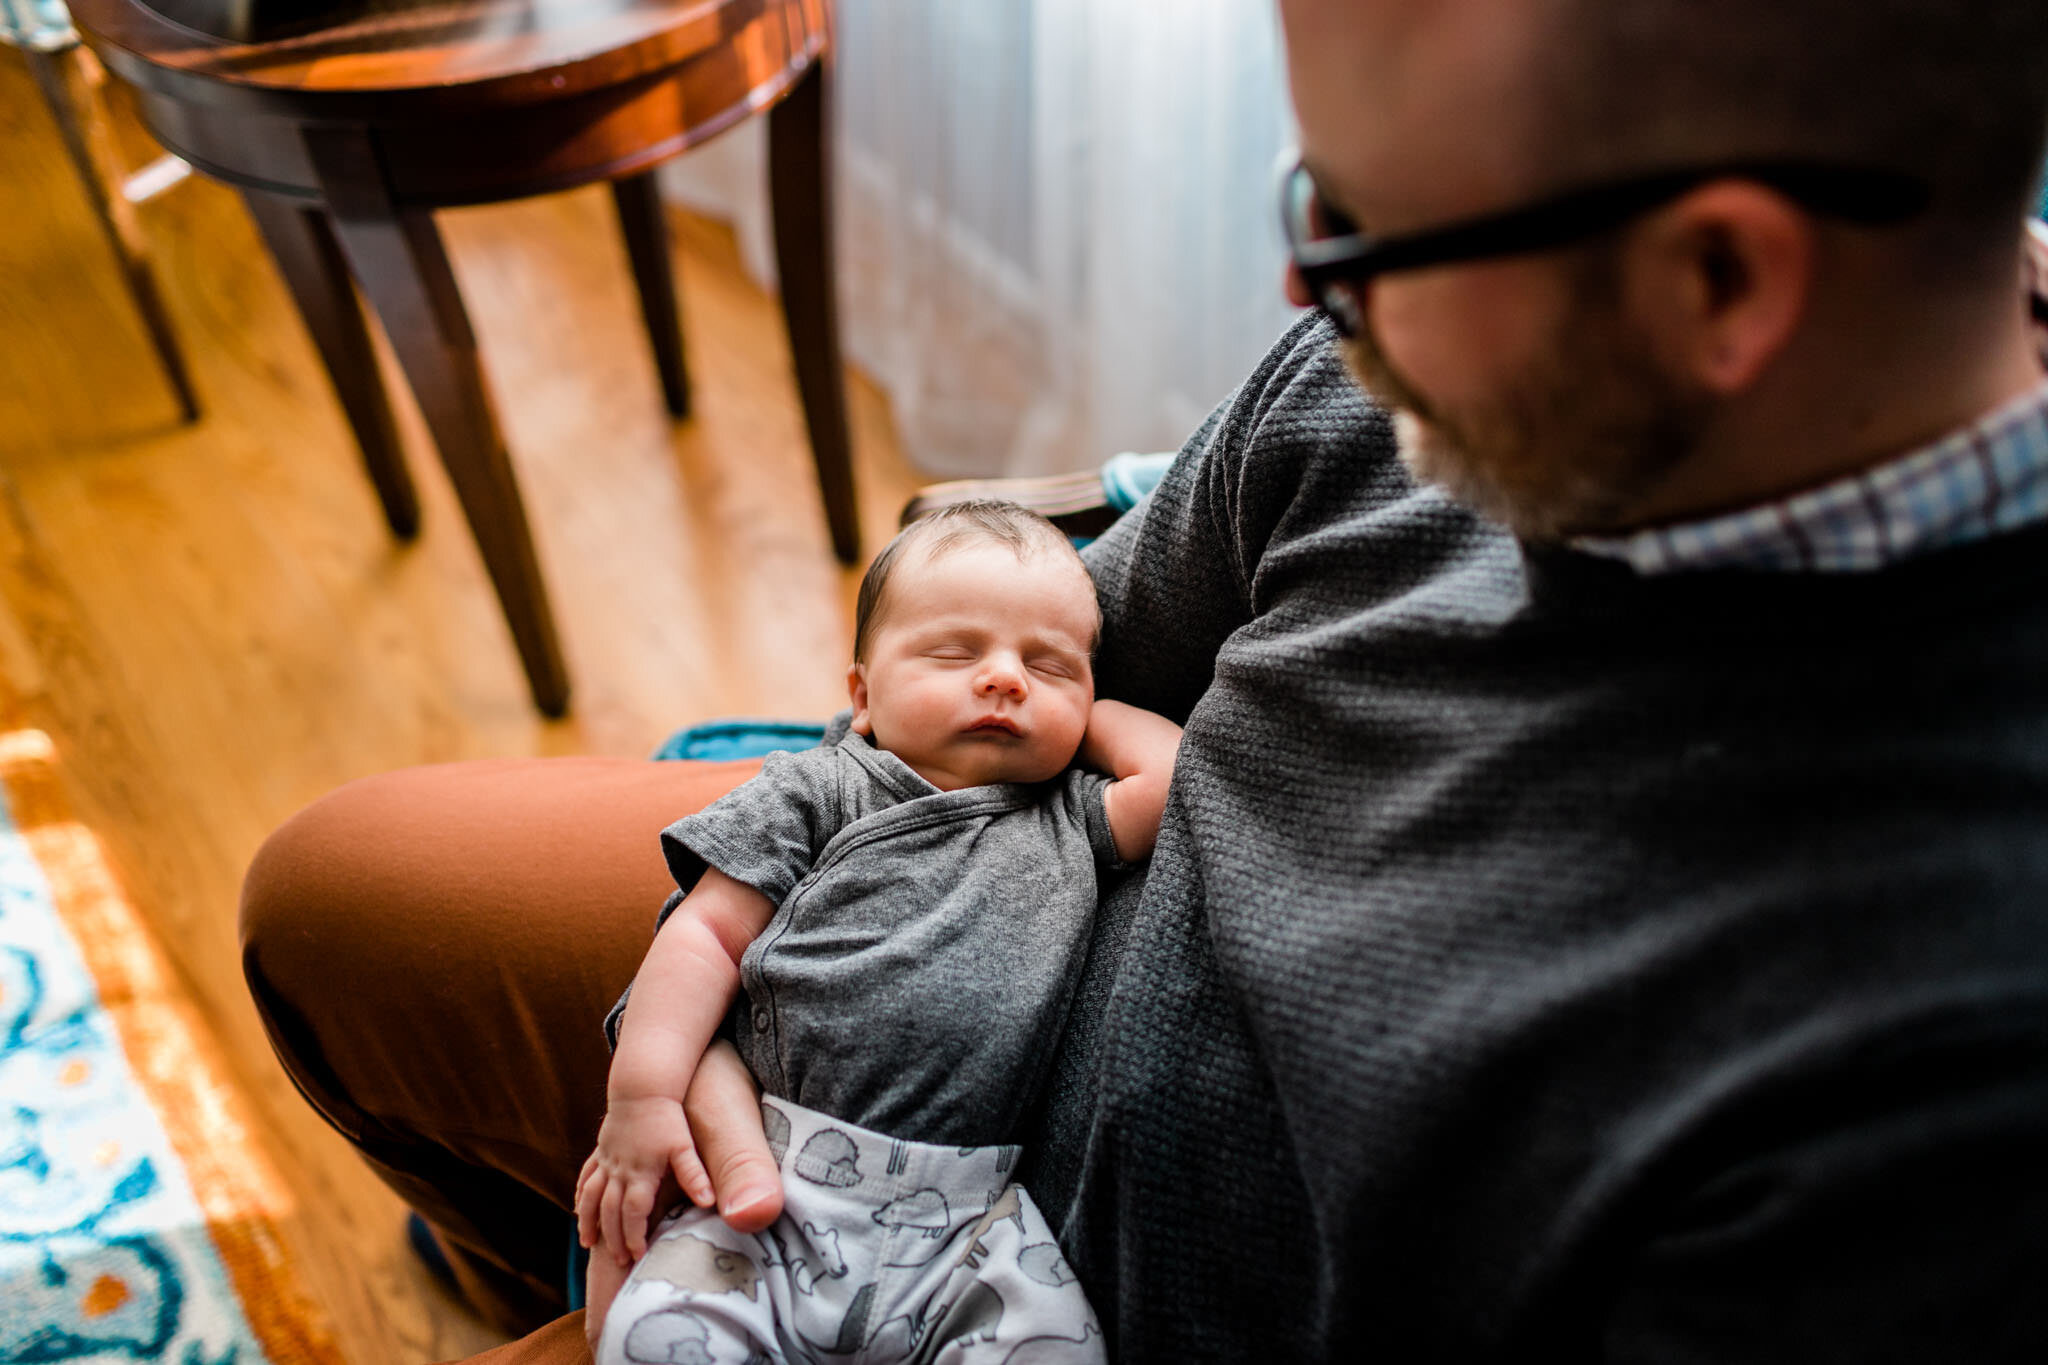 Raleigh Newborn Photographer | By G. Lin Photography | Baby sleeping on dad's lap